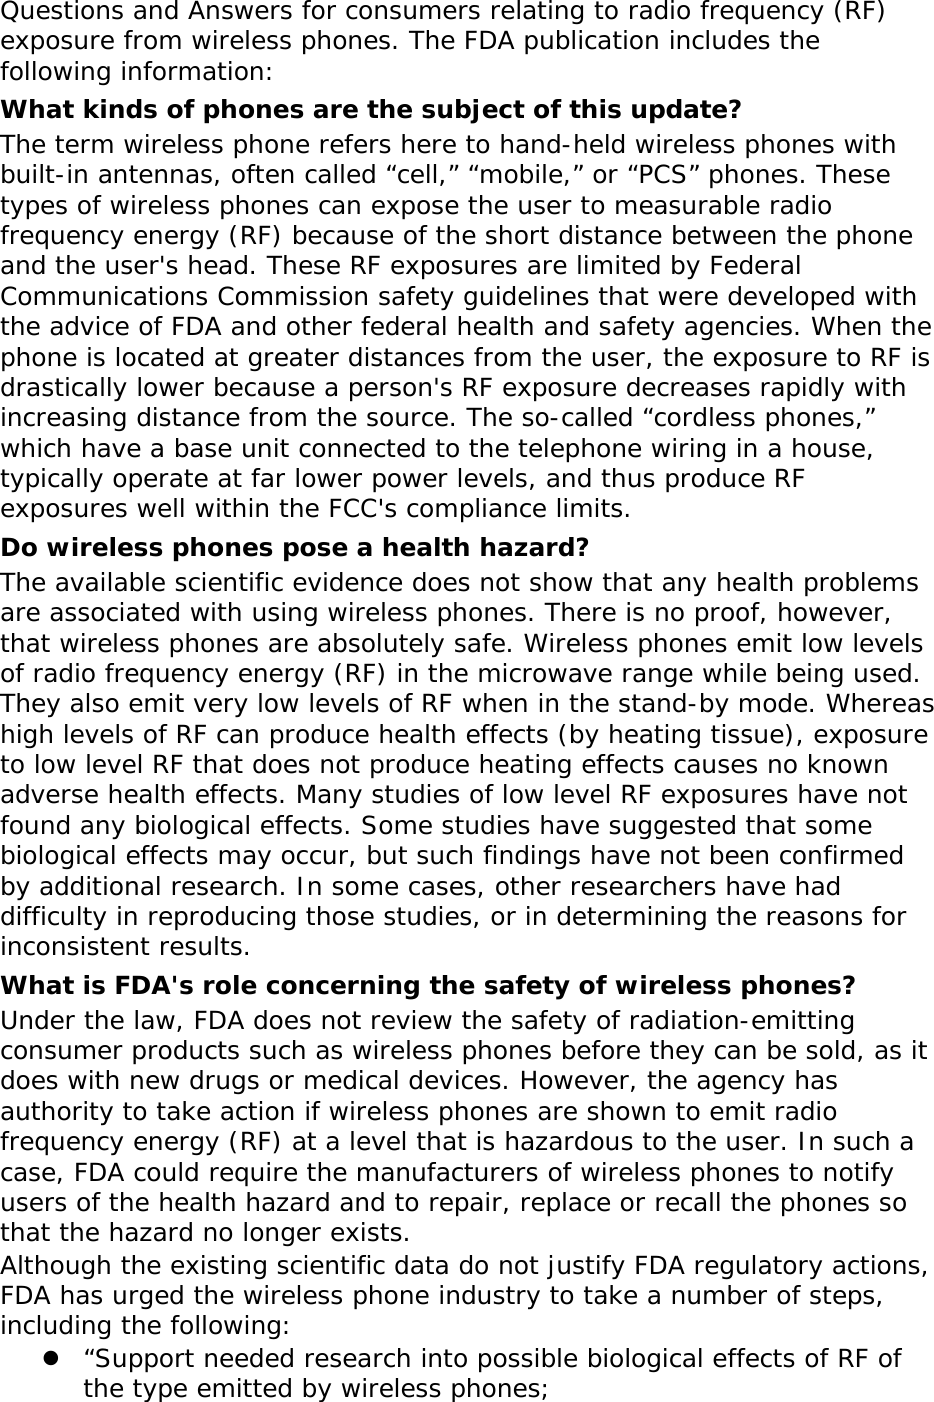 Questions and Answers for consumers relating to radio frequency (RF) exposure from wireless phones. The FDA publication includes the following information: What kinds of phones are the subject of this update? The term wireless phone refers here to hand-held wireless phones with built-in antennas, often called “cell,” “mobile,” or “PCS” phones. These types of wireless phones can expose the user to measurable radio frequency energy (RF) because of the short distance between the phone and the user&apos;s head. These RF exposures are limited by Federal Communications Commission safety guidelines that were developed with the advice of FDA and other federal health and safety agencies. When the phone is located at greater distances from the user, the exposure to RF is drastically lower because a person&apos;s RF exposure decreases rapidly with increasing distance from the source. The so-called “cordless phones,” which have a base unit connected to the telephone wiring in a house, typically operate at far lower power levels, and thus produce RF exposures well within the FCC&apos;s compliance limits. Do wireless phones pose a health hazard? The available scientific evidence does not show that any health problems are associated with using wireless phones. There is no proof, however, that wireless phones are absolutely safe. Wireless phones emit low levels of radio frequency energy (RF) in the microwave range while being used. They also emit very low levels of RF when in the stand-by mode. Whereas high levels of RF can produce health effects (by heating tissue), exposure to low level RF that does not produce heating effects causes no known adverse health effects. Many studies of low level RF exposures have not found any biological effects. Some studies have suggested that some biological effects may occur, but such findings have not been confirmed by additional research. In some cases, other researchers have had difficulty in reproducing those studies, or in determining the reasons for inconsistent results. What is FDA&apos;s role concerning the safety of wireless phones? Under the law, FDA does not review the safety of radiation-emitting consumer products such as wireless phones before they can be sold, as it does with new drugs or medical devices. However, the agency has authority to take action if wireless phones are shown to emit radio frequency energy (RF) at a level that is hazardous to the user. In such a case, FDA could require the manufacturers of wireless phones to notify users of the health hazard and to repair, replace or recall the phones so that the hazard no longer exists. Although the existing scientific data do not justify FDA regulatory actions, FDA has urged the wireless phone industry to take a number of steps, including the following: z “Support needed research into possible biological effects of RF of the type emitted by wireless phones; 